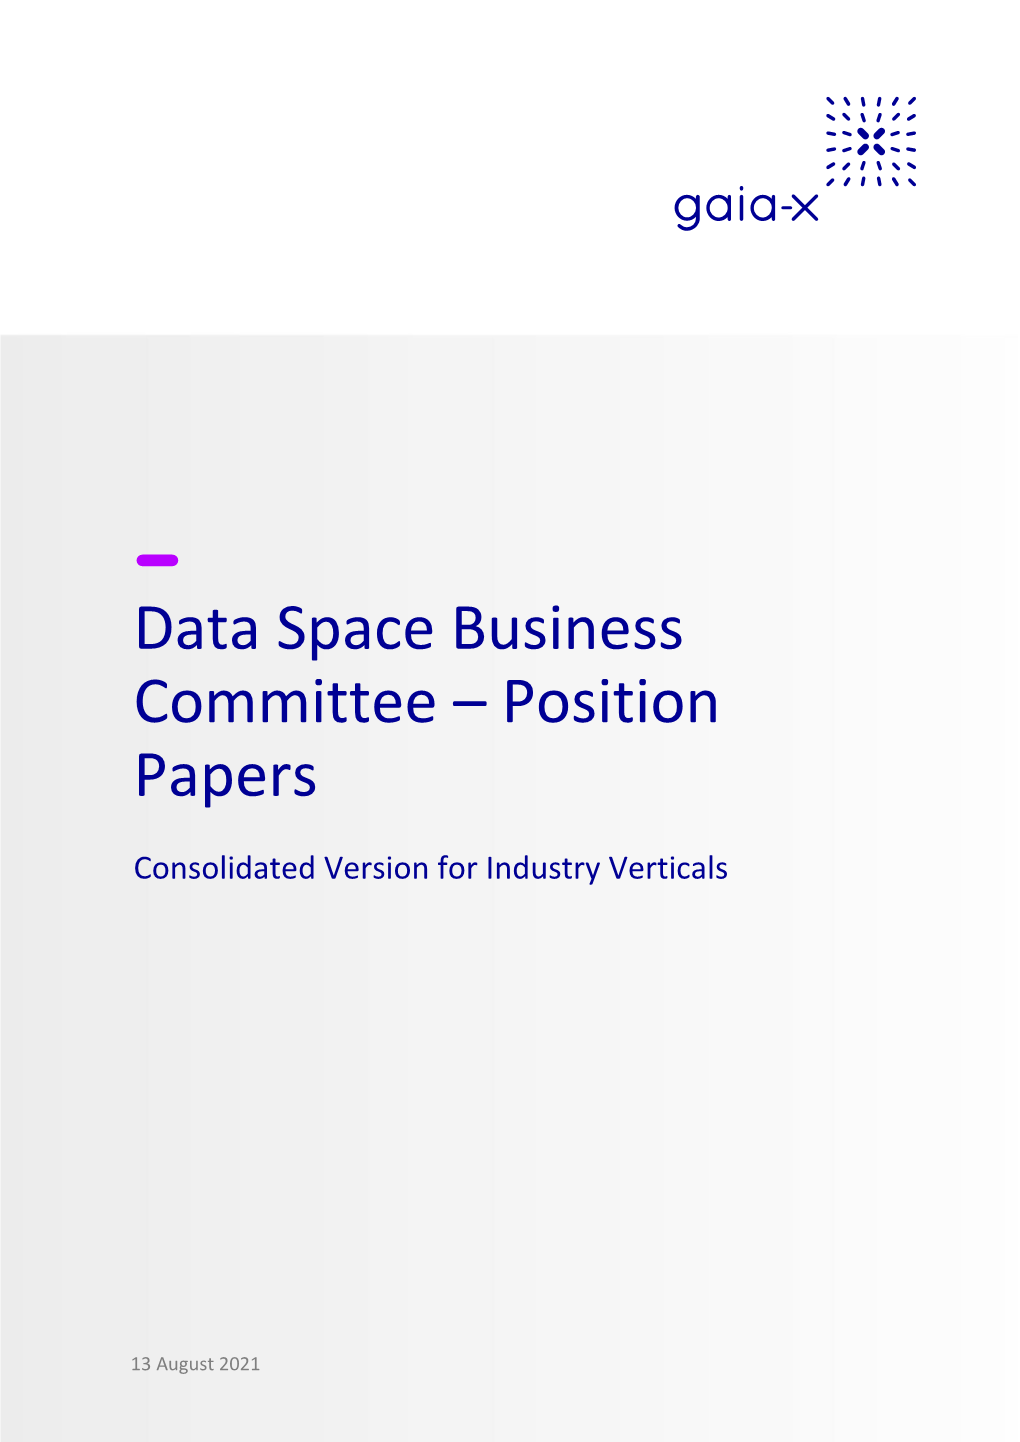 Data Space Business Committee – Position Papers